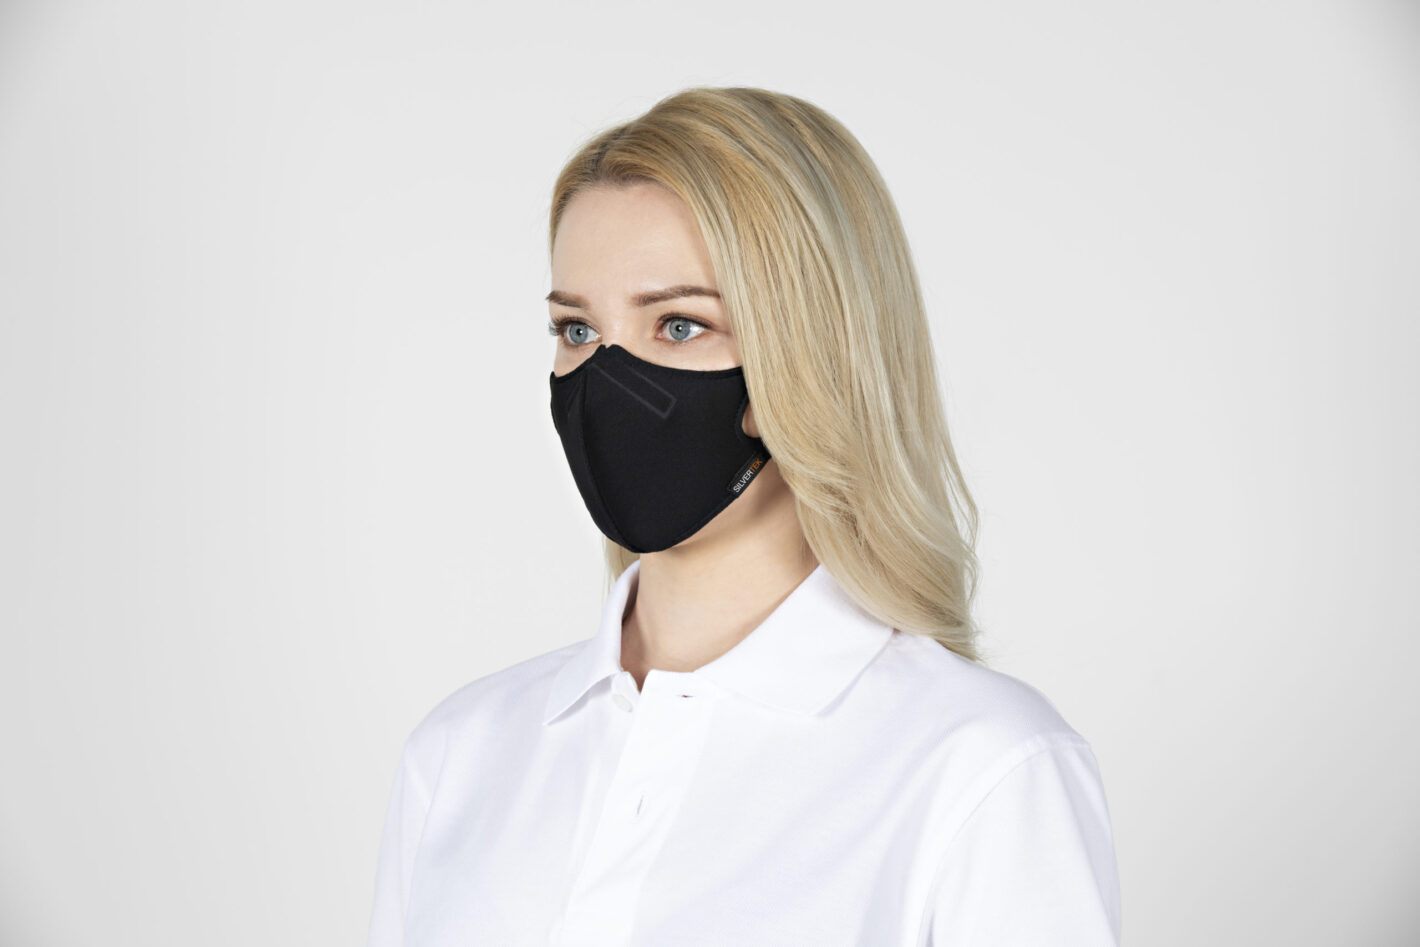 olygiene® partner Silvertek® has taken their mask design and quality a step further with FDA-listing for their NanoFit Masks with Polygiene ViralOff® antimicrobial technology.